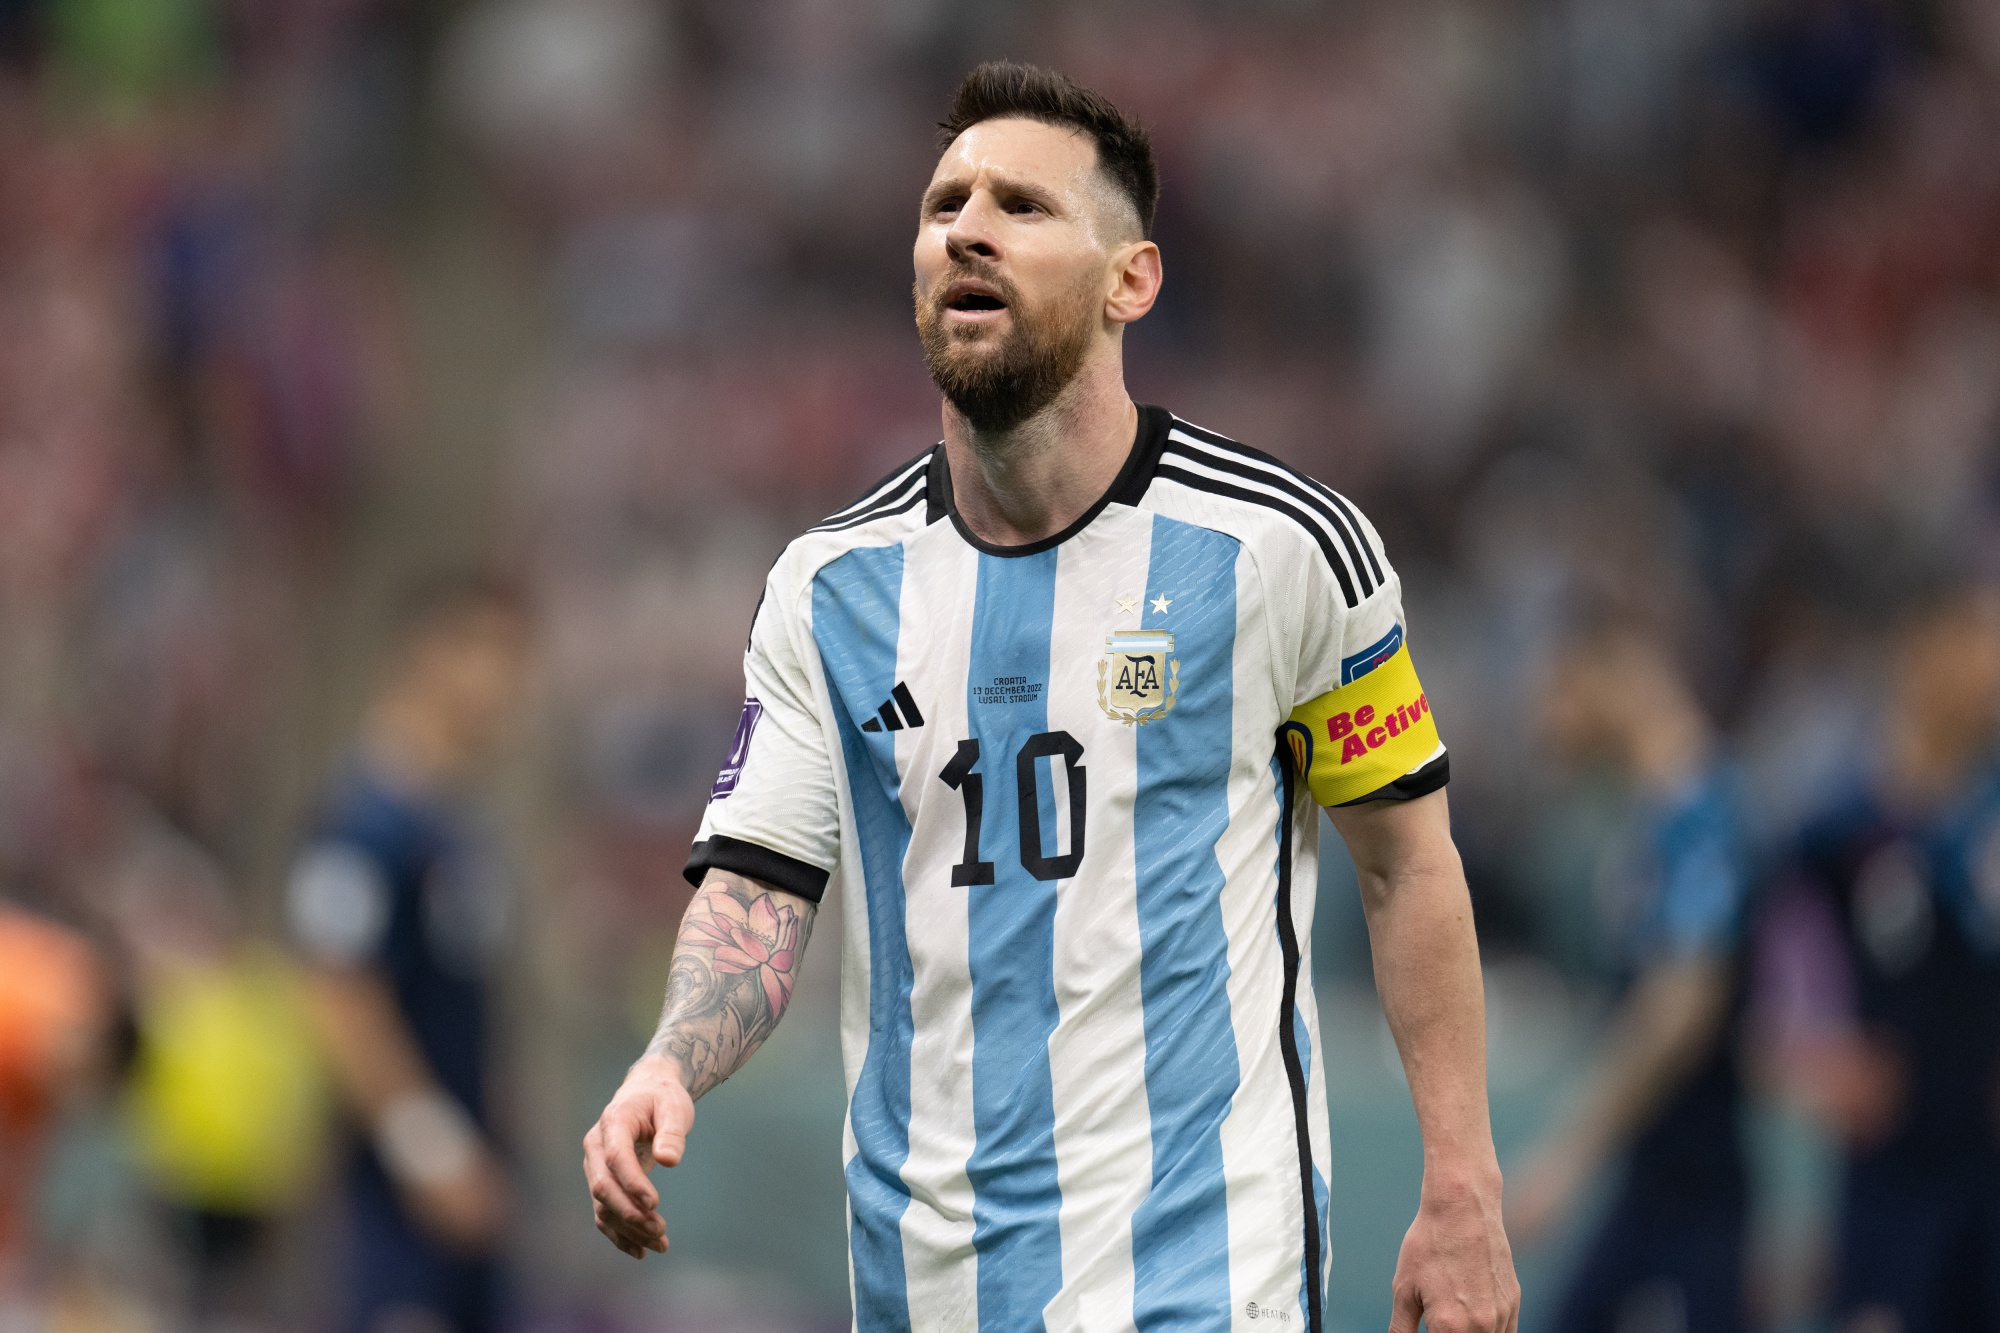 Argentina Messi Jerseys in Low Supply Ahead of World Cup Final